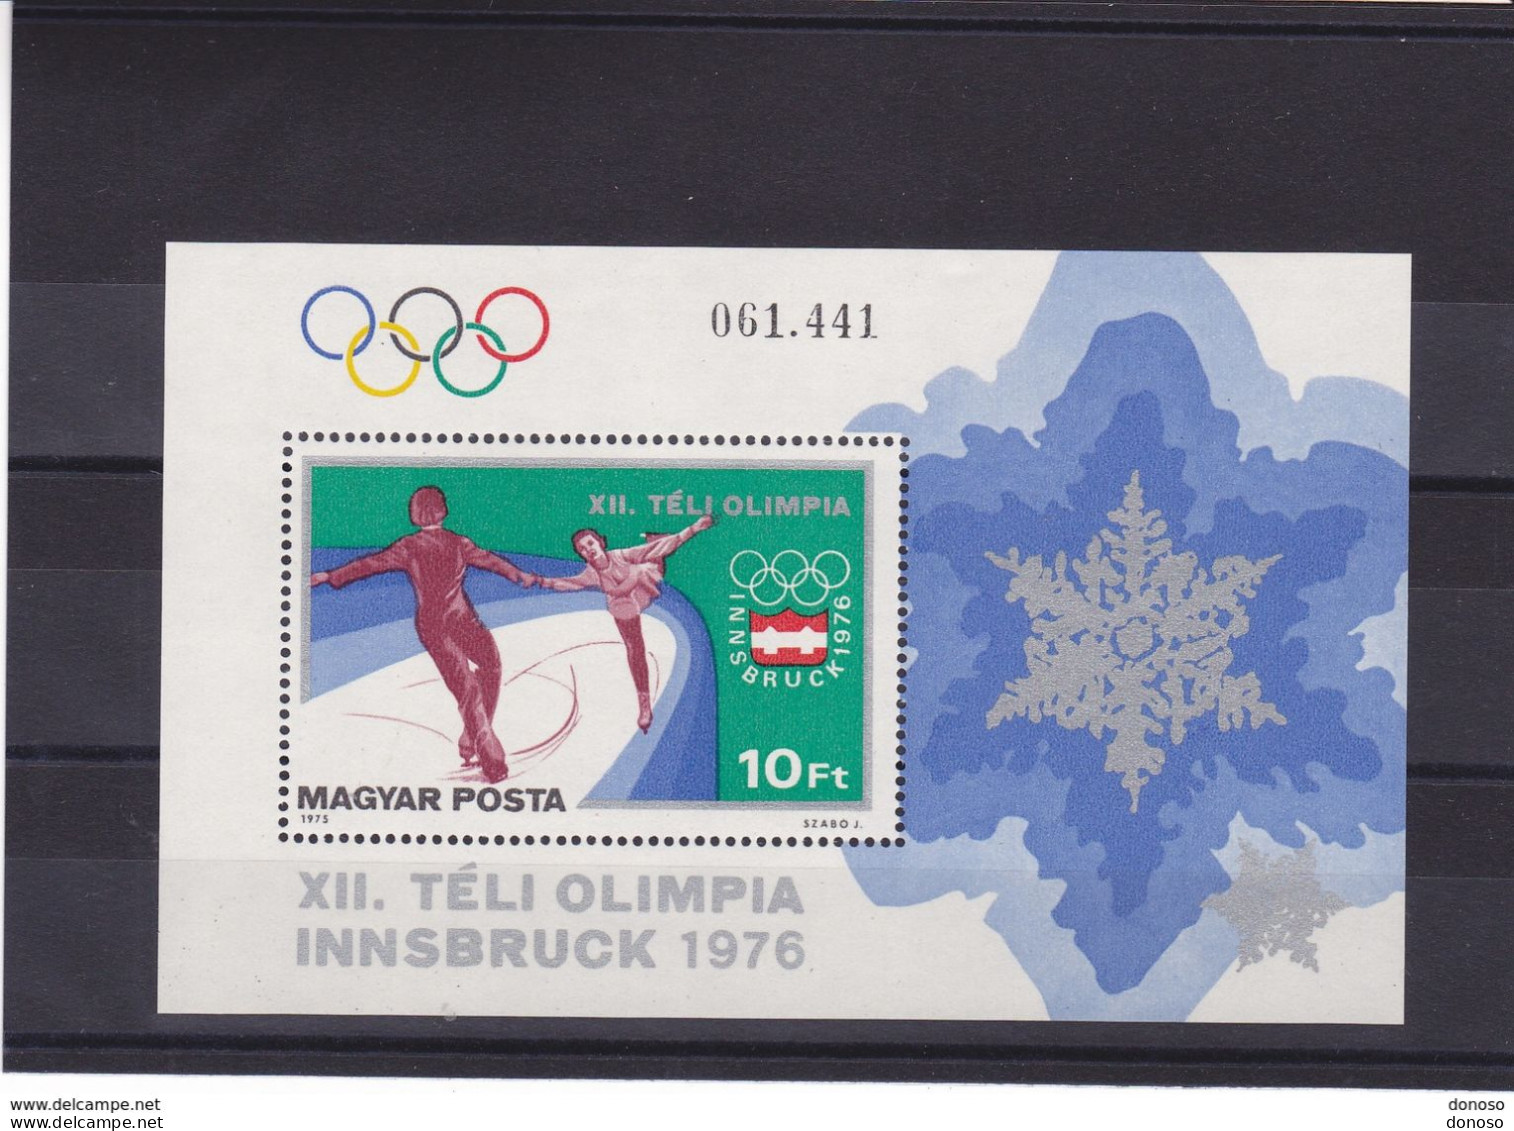 HONGRIE 1975 JEUX OLYMPIQUES INNSBRUCK  PATINAGE Yvert BF 122, Michel Bl 116 NEUF** MNH Cote Yv 6 Euros - Blocs-feuillets